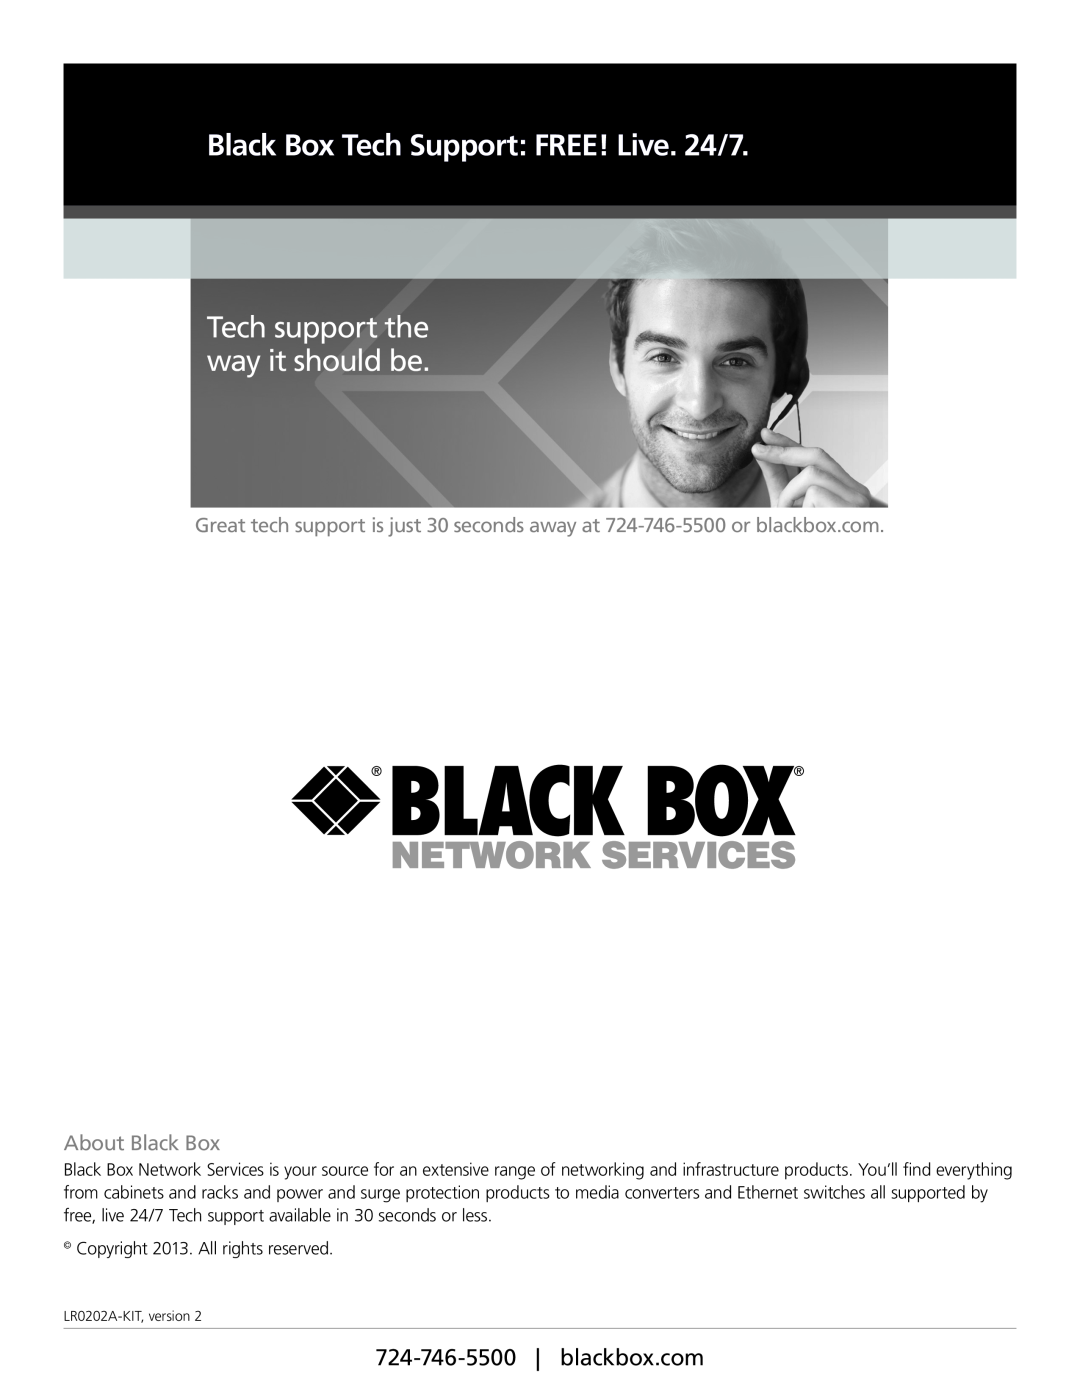 Black Box LR0202A-KIT manual Black Box Tech Support FREE! Live. 24/7, Tech support the way it should be, About Black Box 